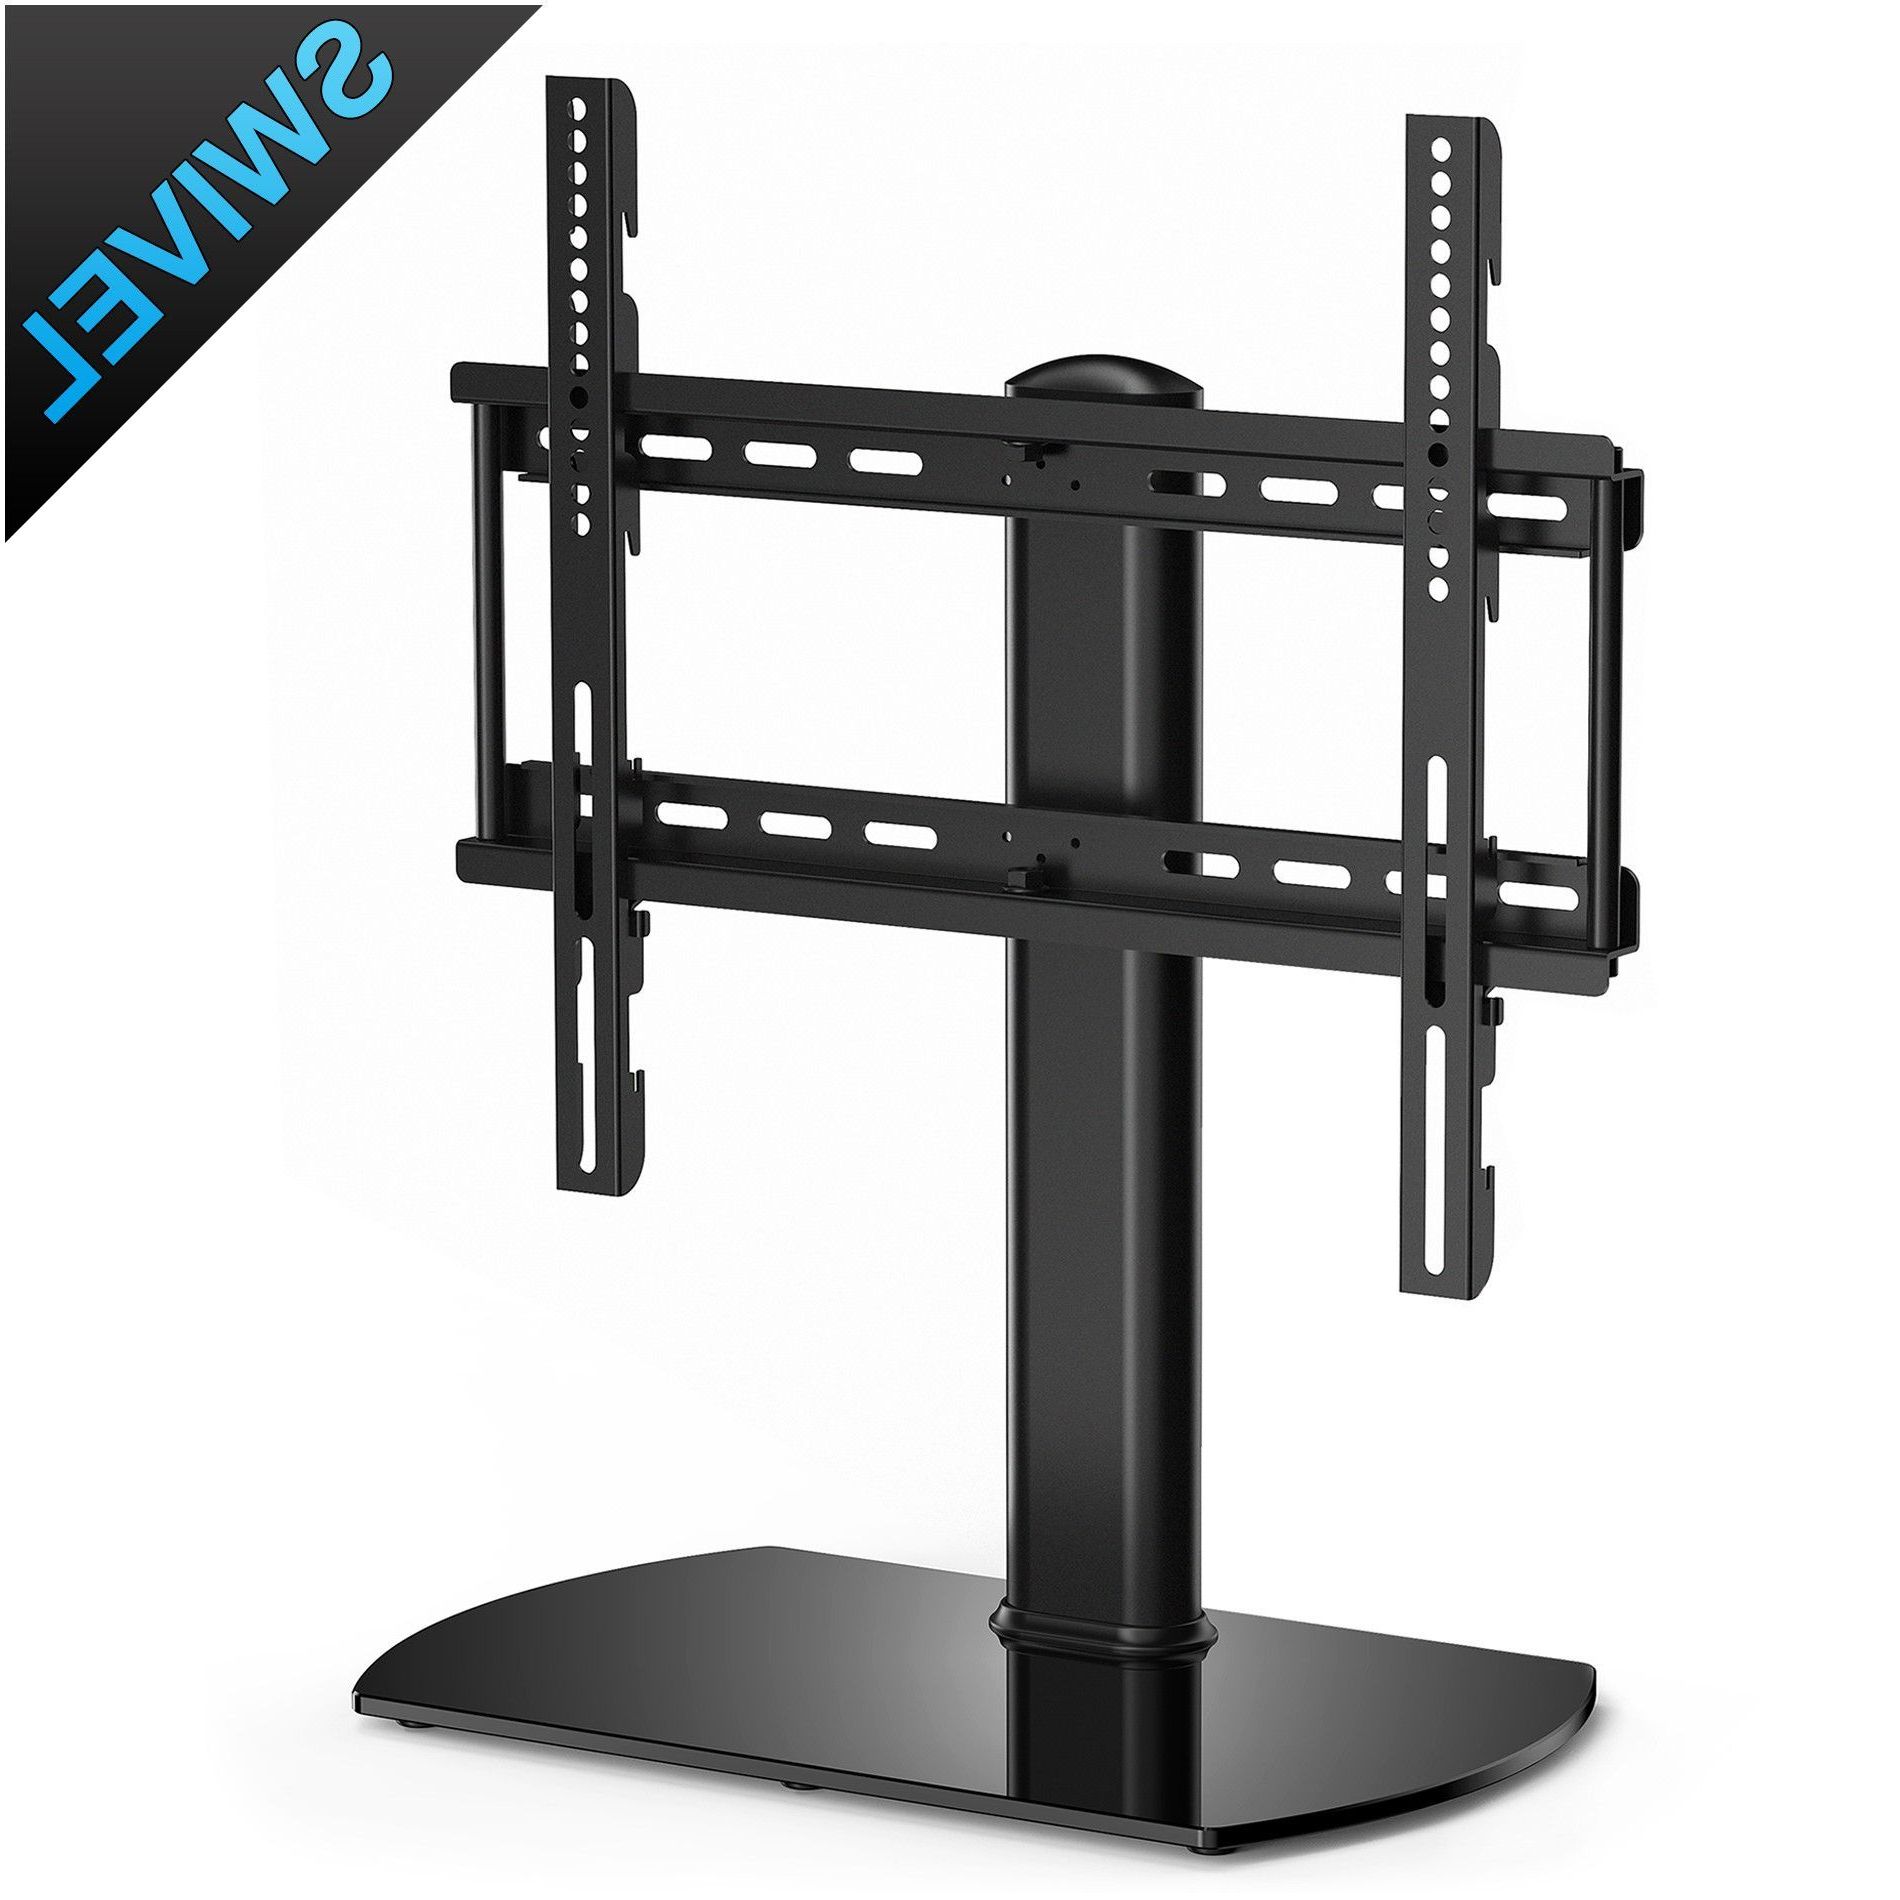 Fitueyes Universal Tabletop Tv Stand Pedestal Base Wall Within Modern Black Universal Tabletop Tv Stands (Gallery 3 of 20)